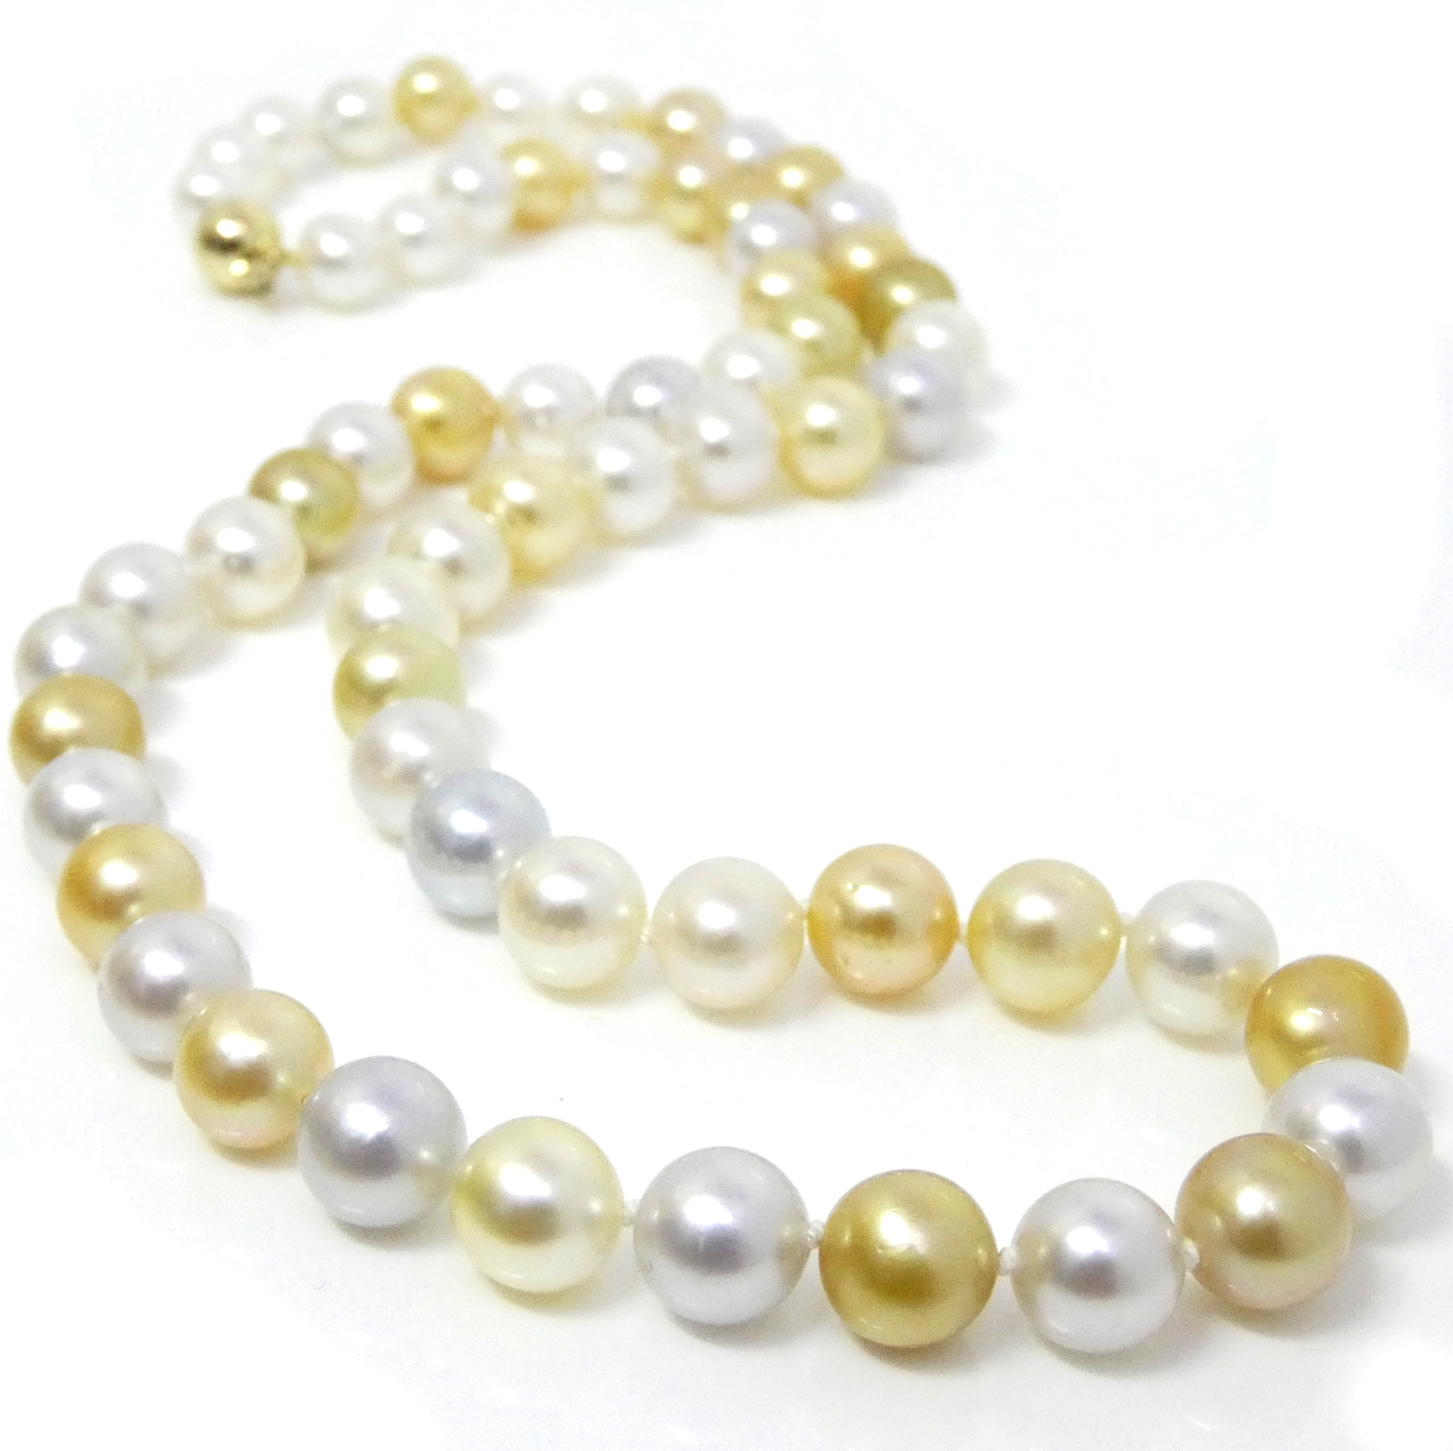 Mixed White and Gold South Sea 'Pelosi' Pearl Necklace